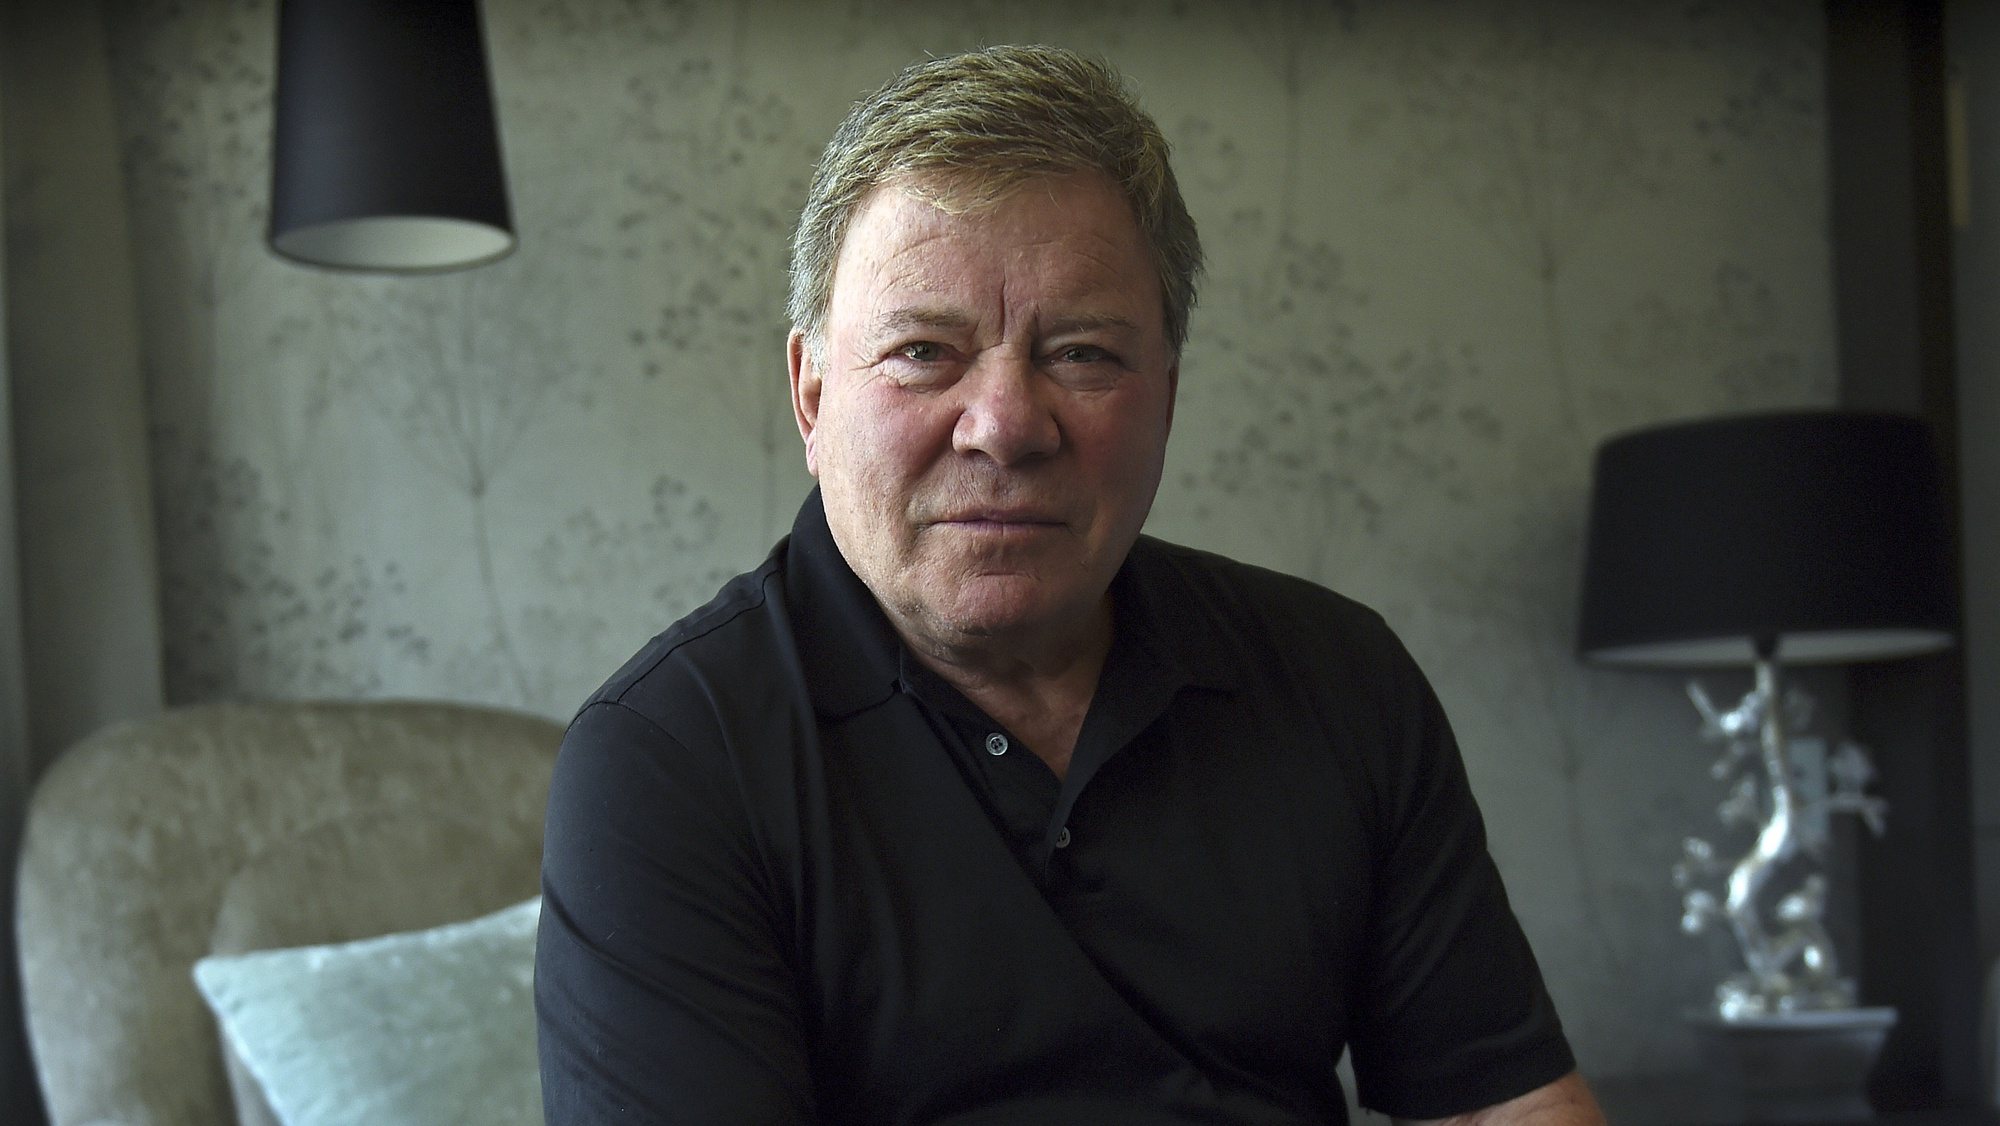 epa09076824 (FILE) - A file picture dated 01 December 2013 shows Canadian actor William Shatner posing for photos in Brisbane, Australia, 12 October 2015 (reissued 15 March 2021). Shatner turns 90 on 22 March 2021.  EPA/DAN PELED AUSTRALIA AND NEW ZEALAND OUT